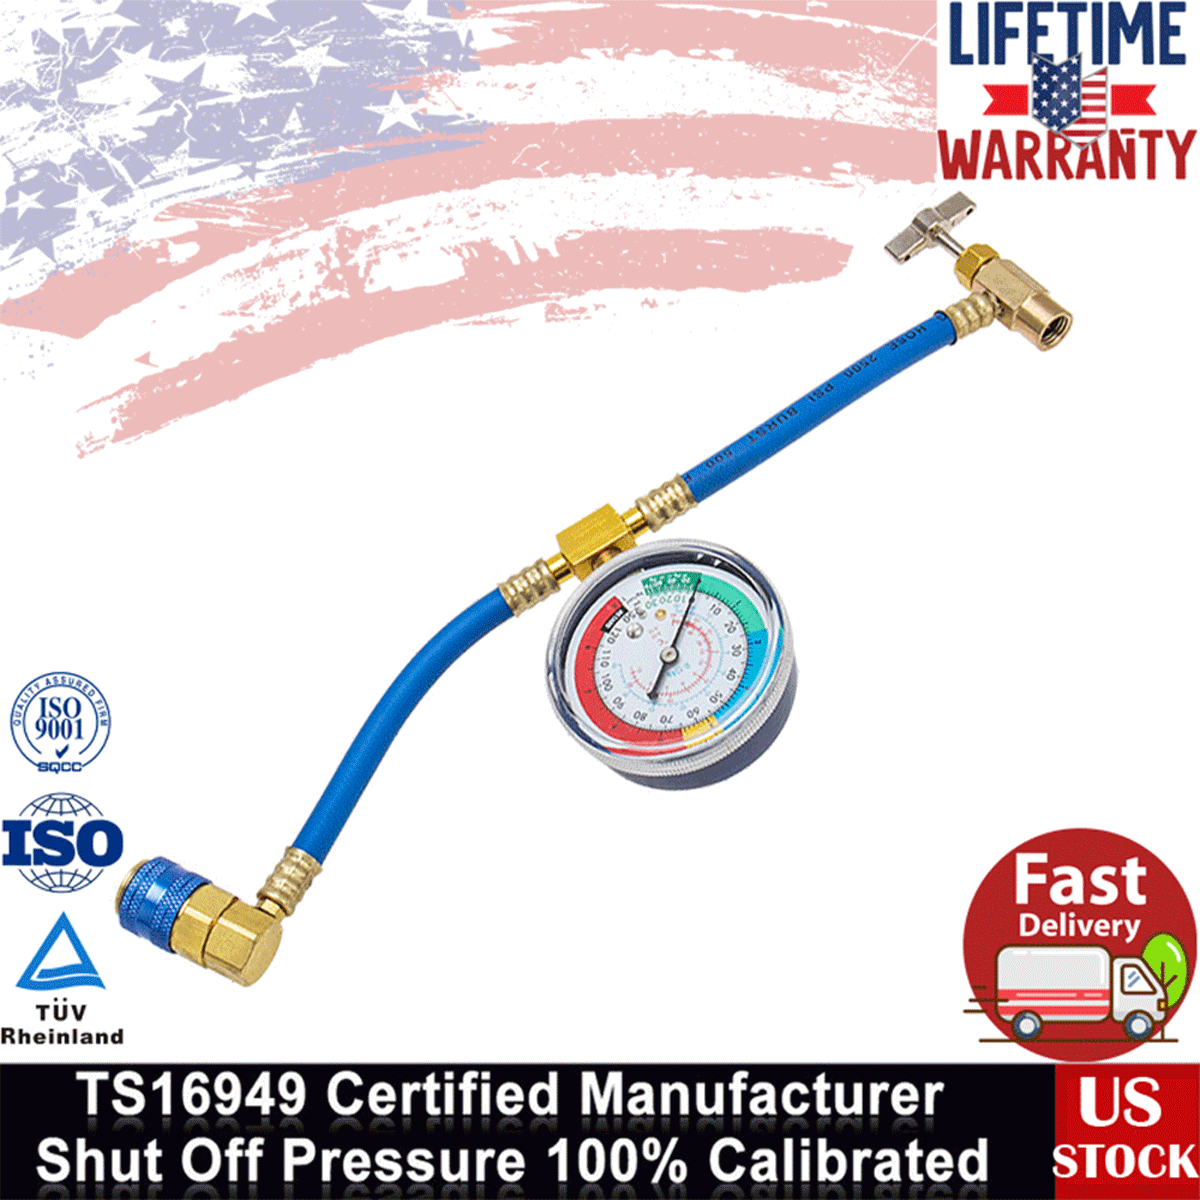 Auto Air Conditioning U Charging Hose Low Pressure Measuring Meter with 1/2 Acme Can Tap and R134A Quick Coupler Car R134A Refrigerant Recharge Kit 100PSI N / A JIFETOR AC Charge Hose with Gauge 